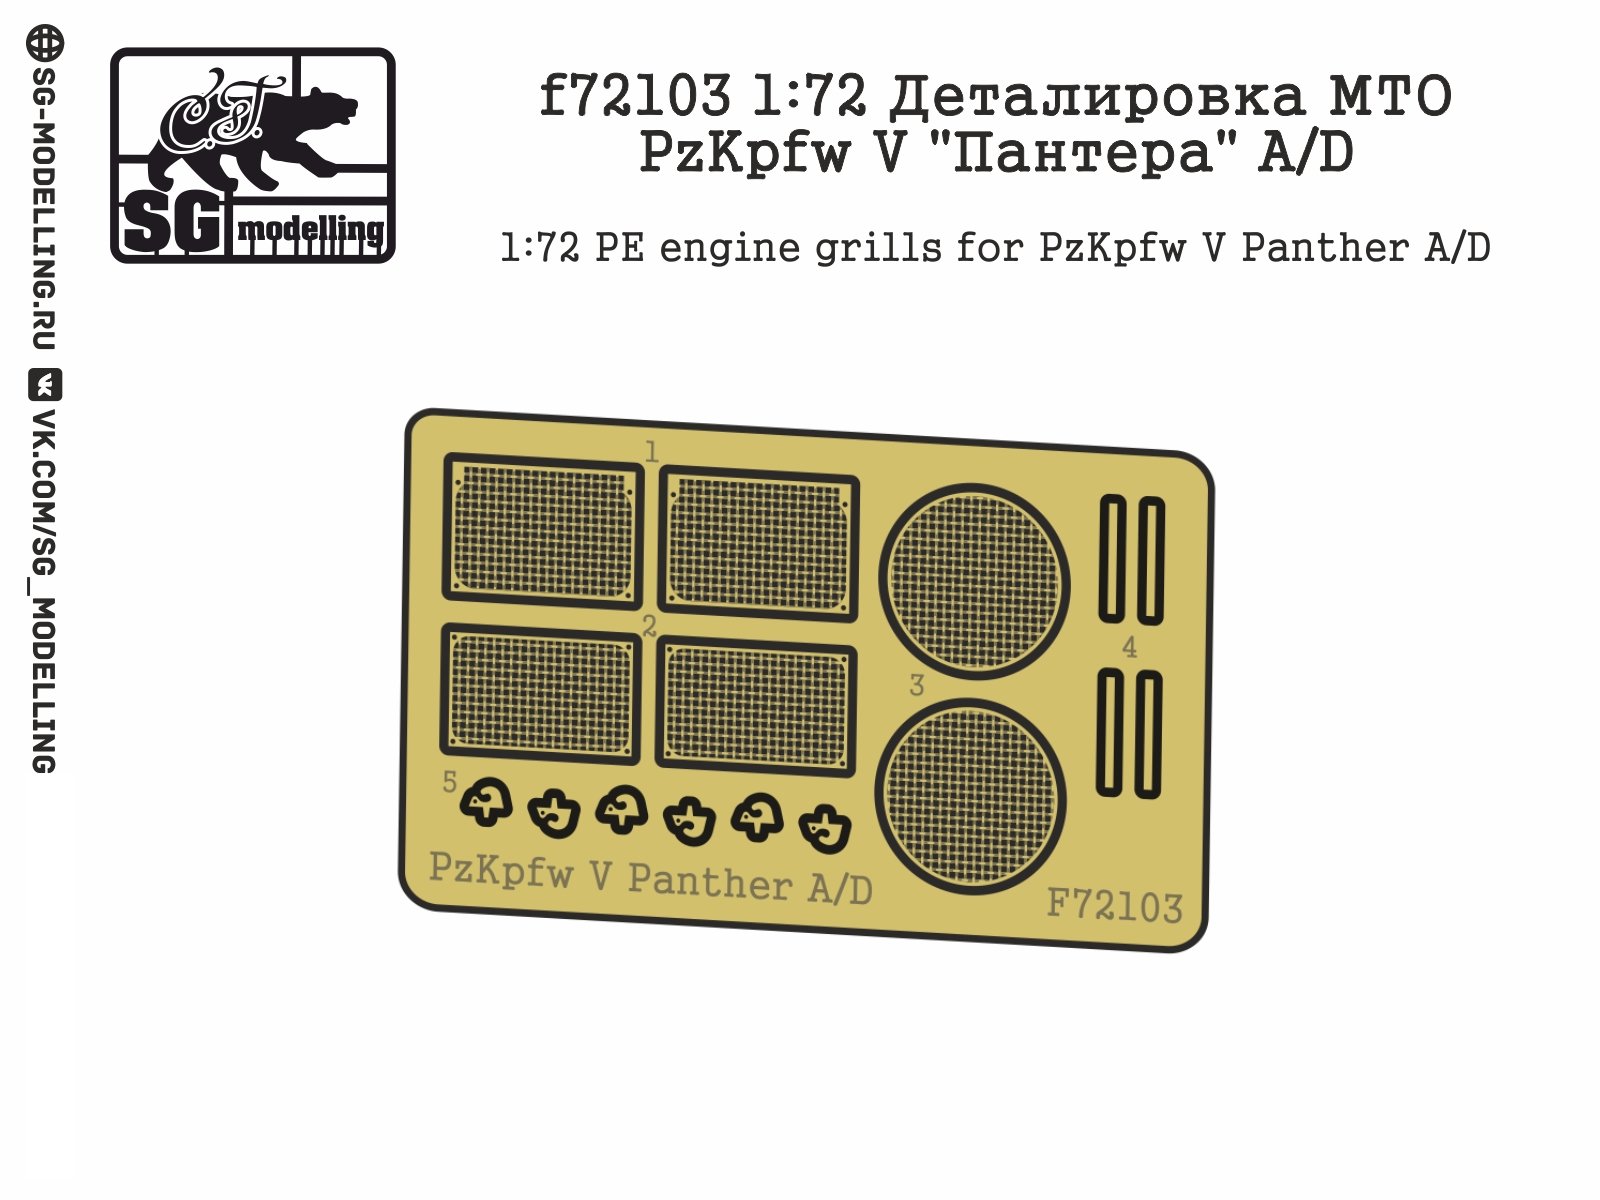 F72103 1:72 Detailing MTO PZKPFW V "Panther" A/D (FTD) - imodeller.store